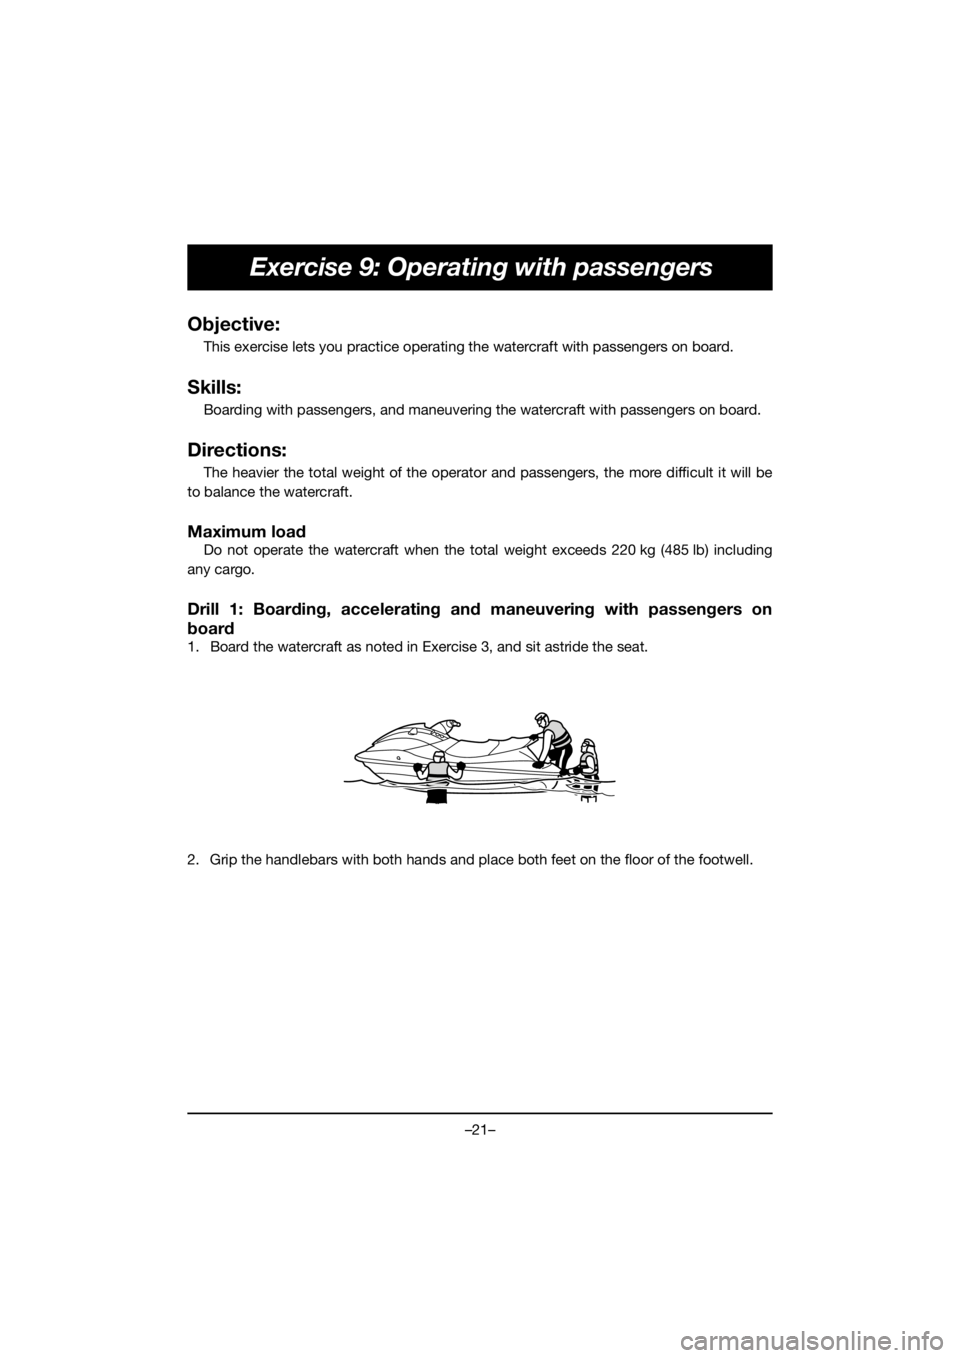 YAMAHA EX DELUXE 2019 Owners Manual –21–
Exercise 9: Operating with passengers
Objective:
This exercise lets you practice operating the watercraft with passengers on board.
Skills:
Boarding with passengers, and maneuvering the water